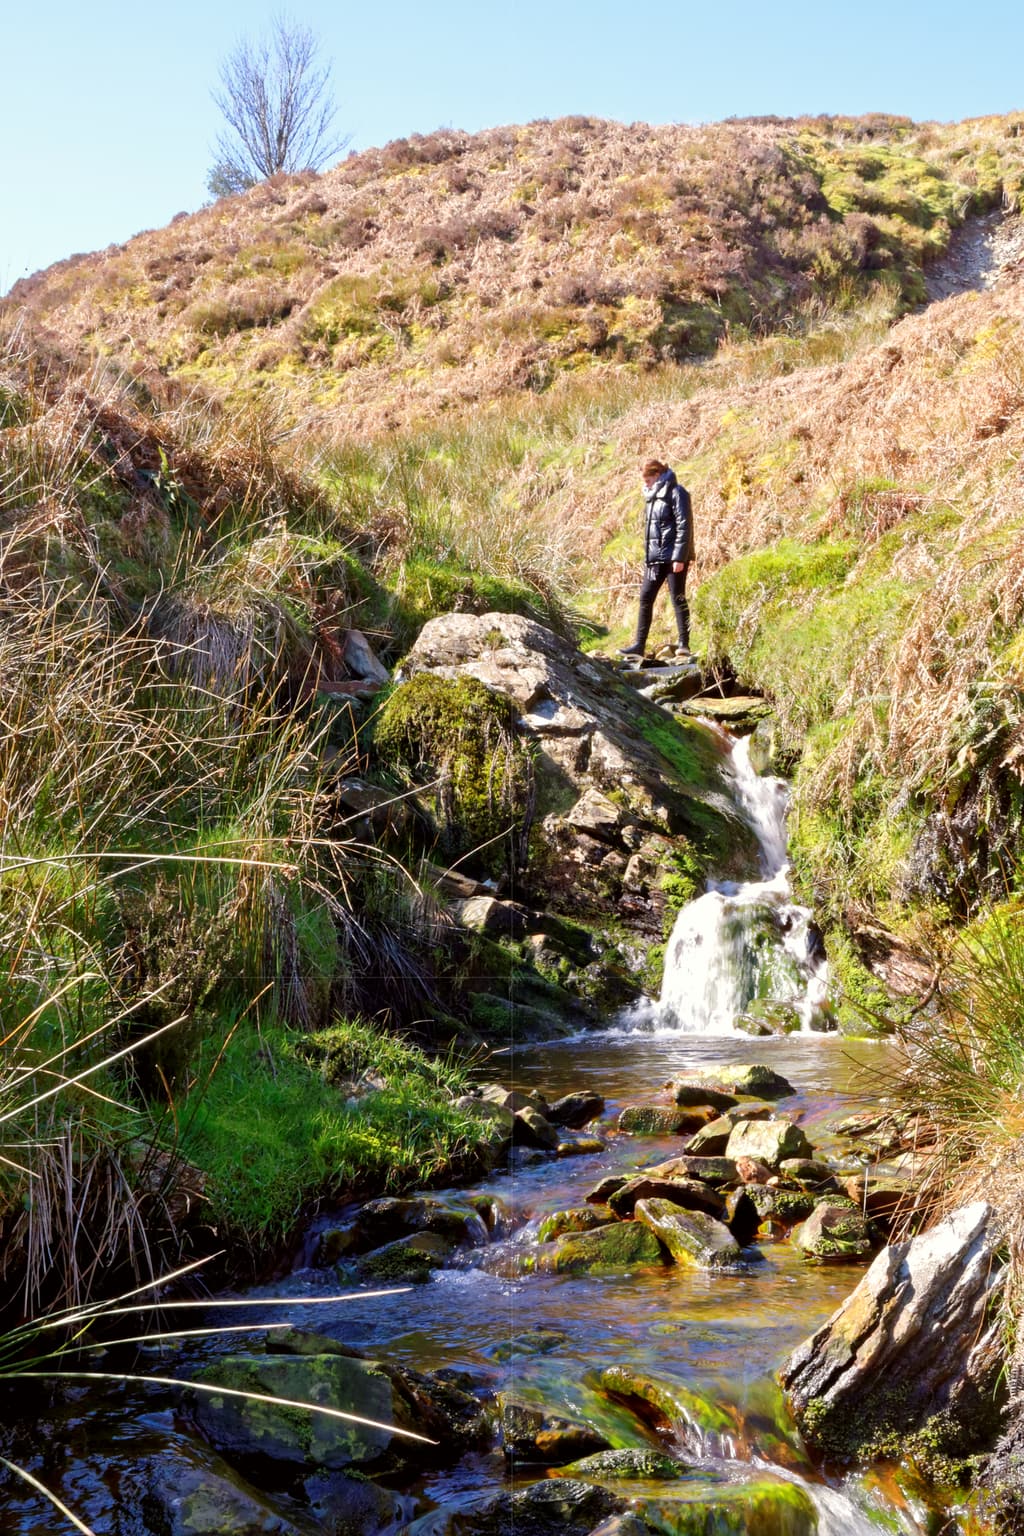 Hiking over a stream in the mountains of Snowdonia